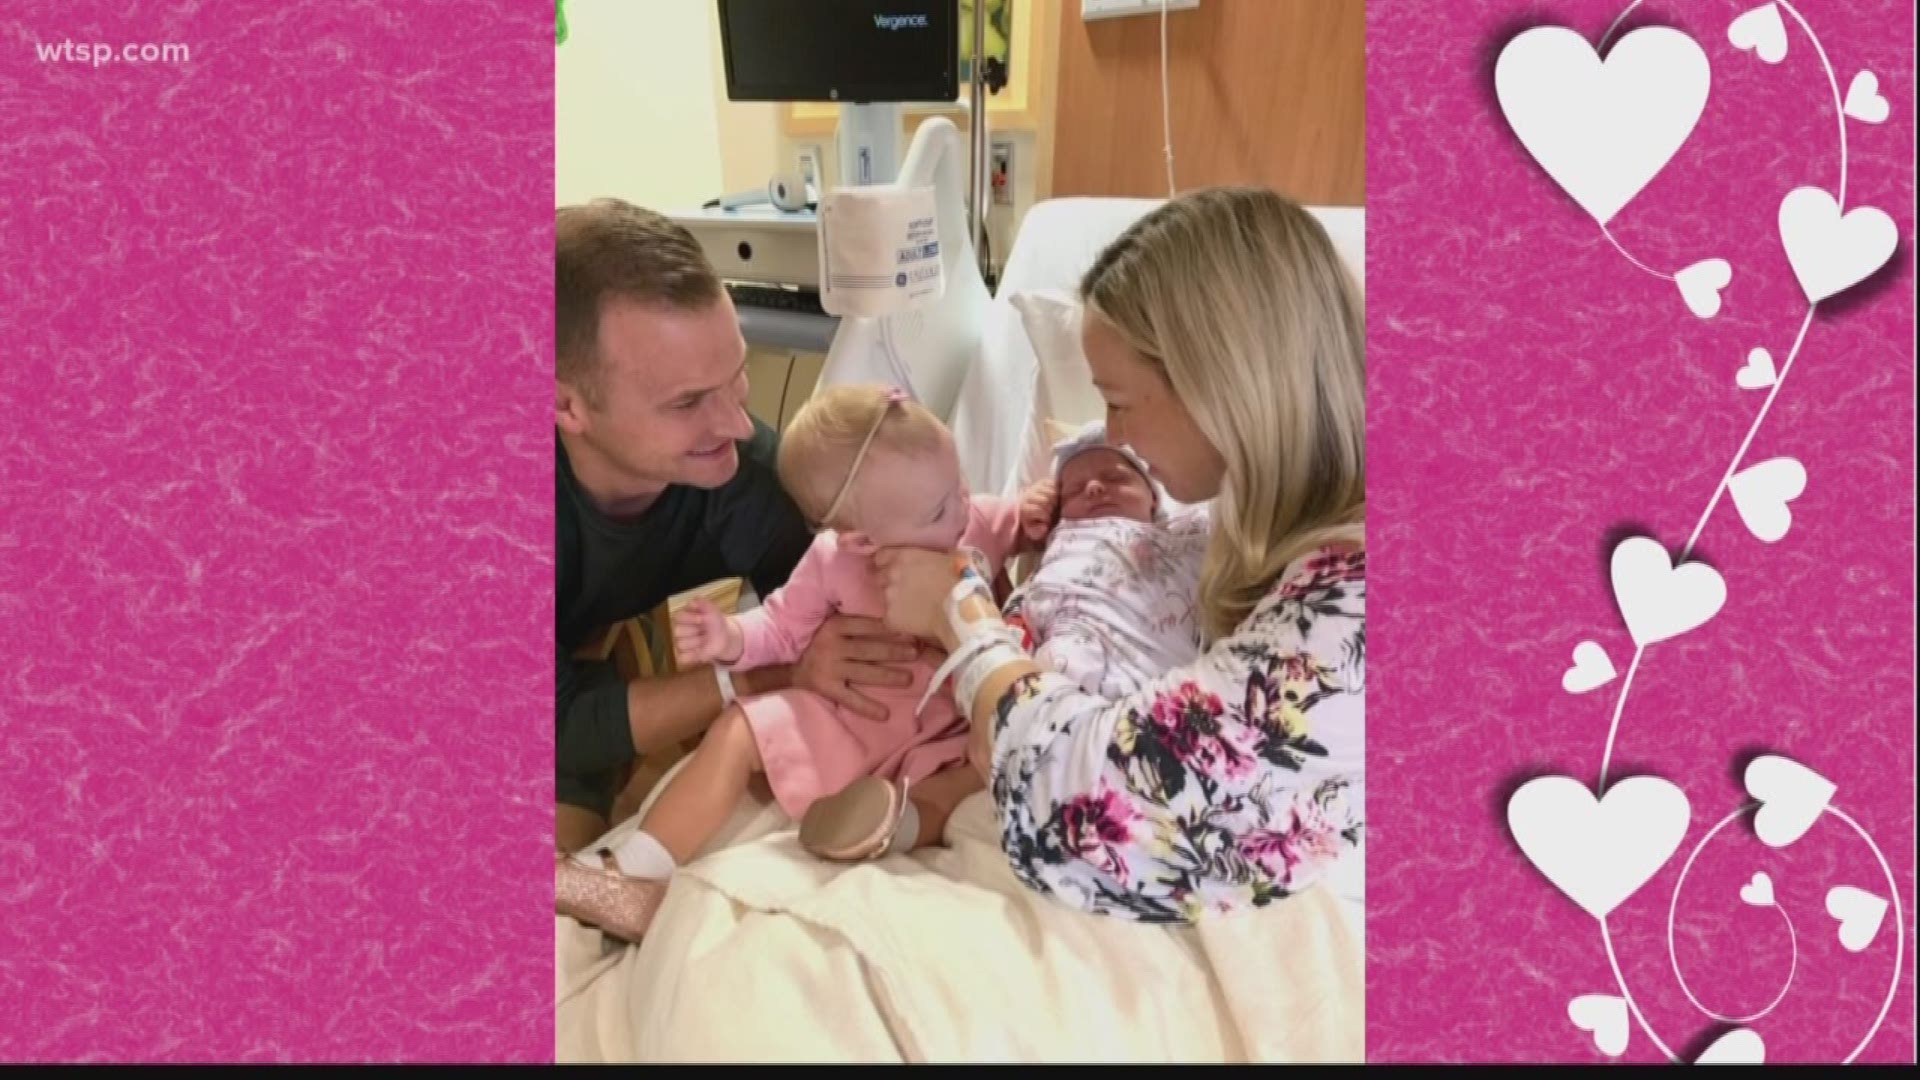 10News' Liz Crawford and Grant Gilmore welcome baby girl Rowen!